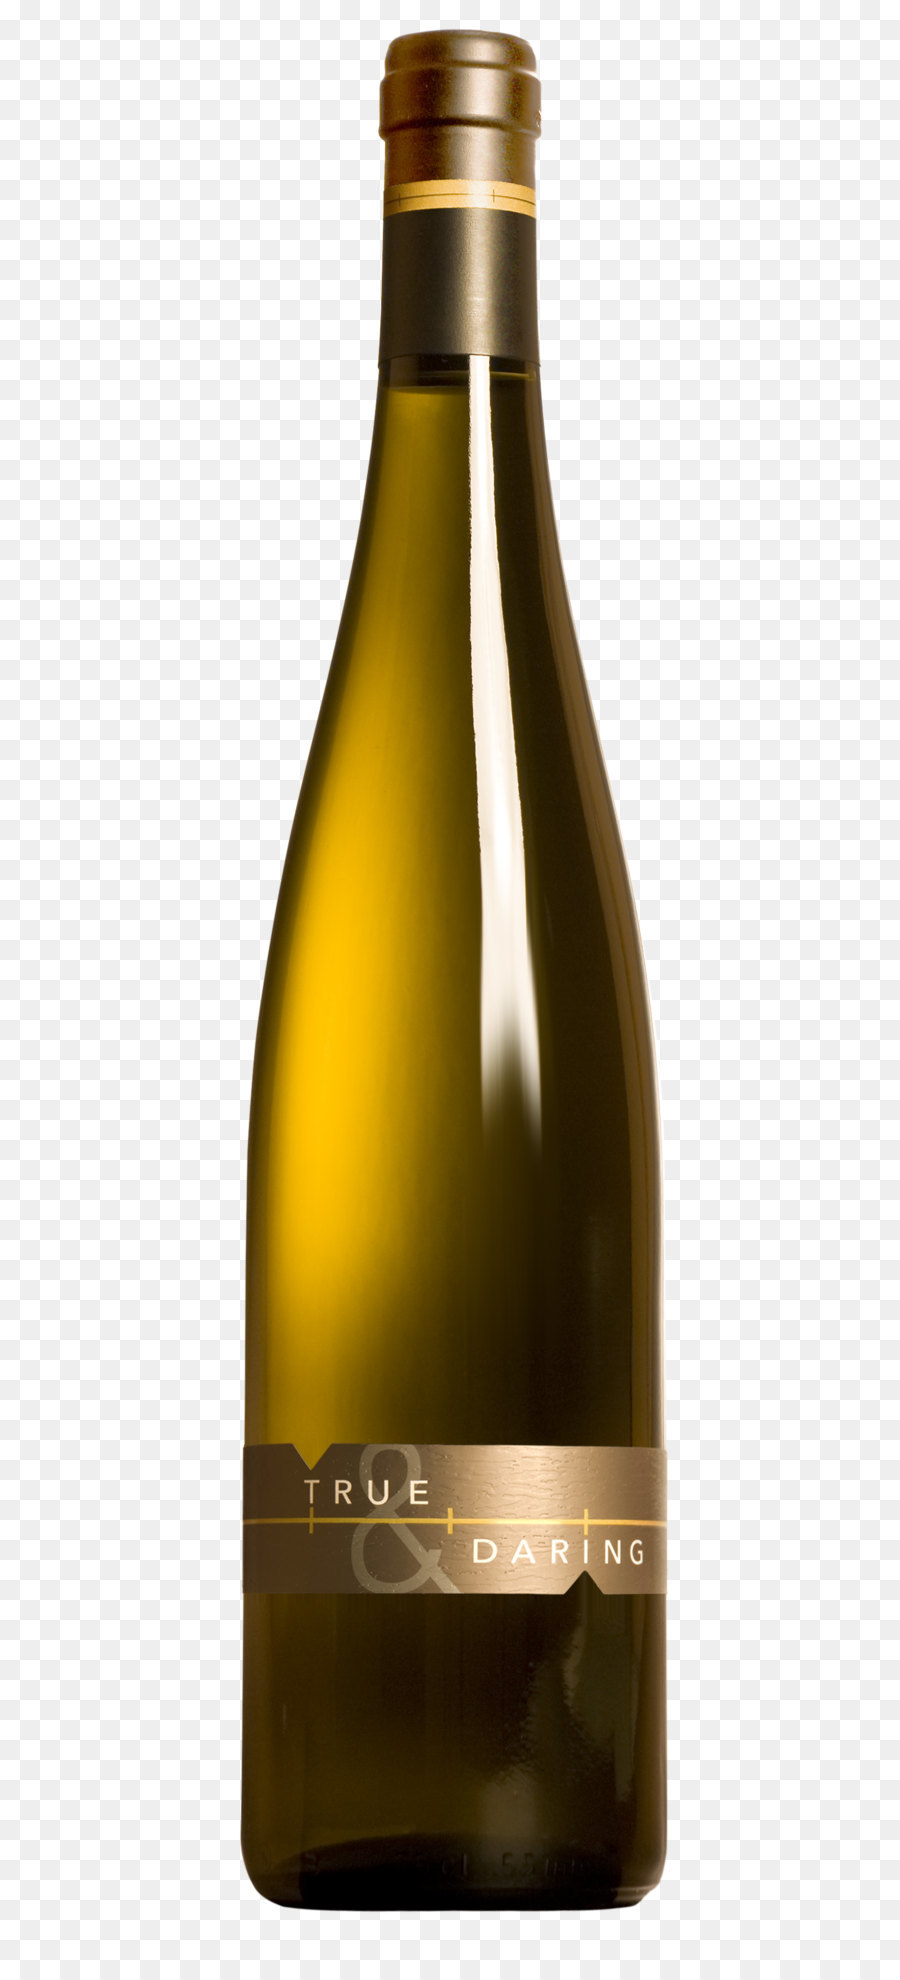 White wine Champagne Bottle Glass - Wine bottle PNG image png download - 1170*3539 - Free Transparent Wine png Download.